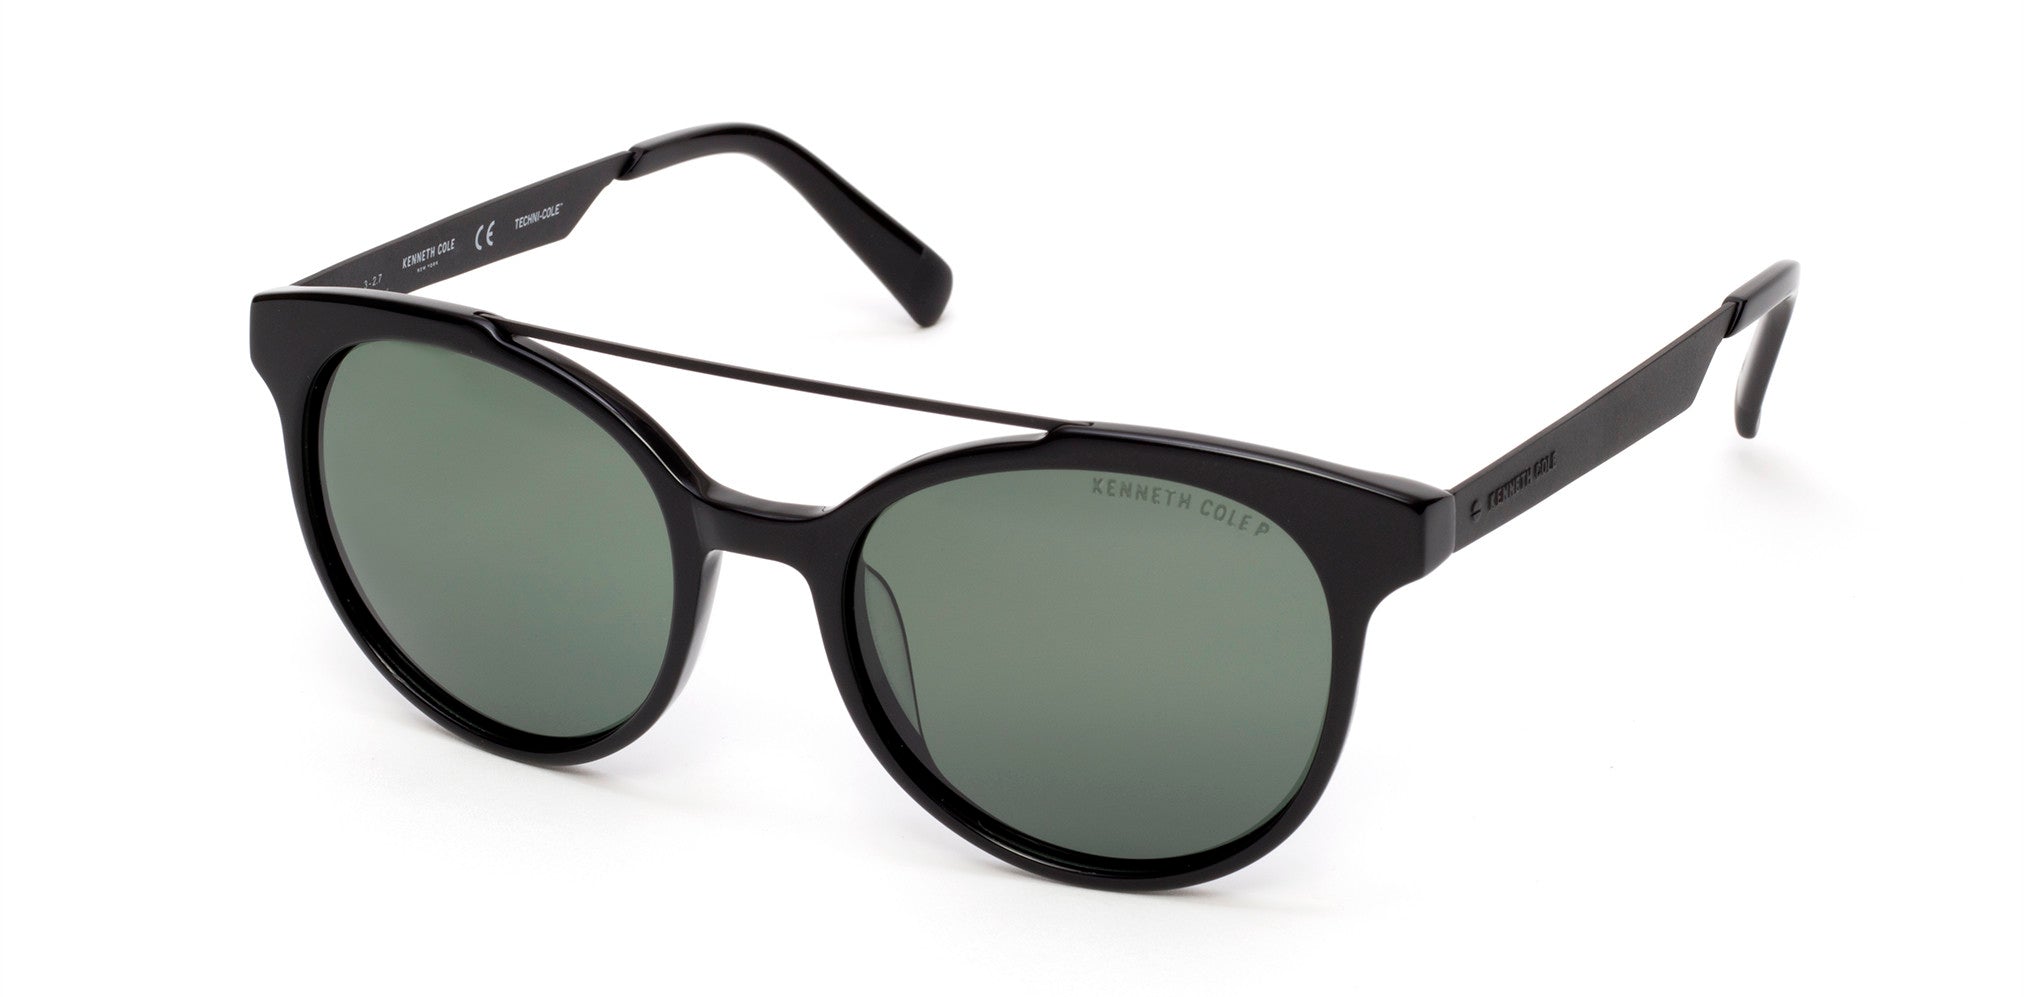 Kenneth Cole New York,Kenneth Cole Reaction KC7226 Round Sunglasses 01R-01R - Shiny Black  / Green Polarized